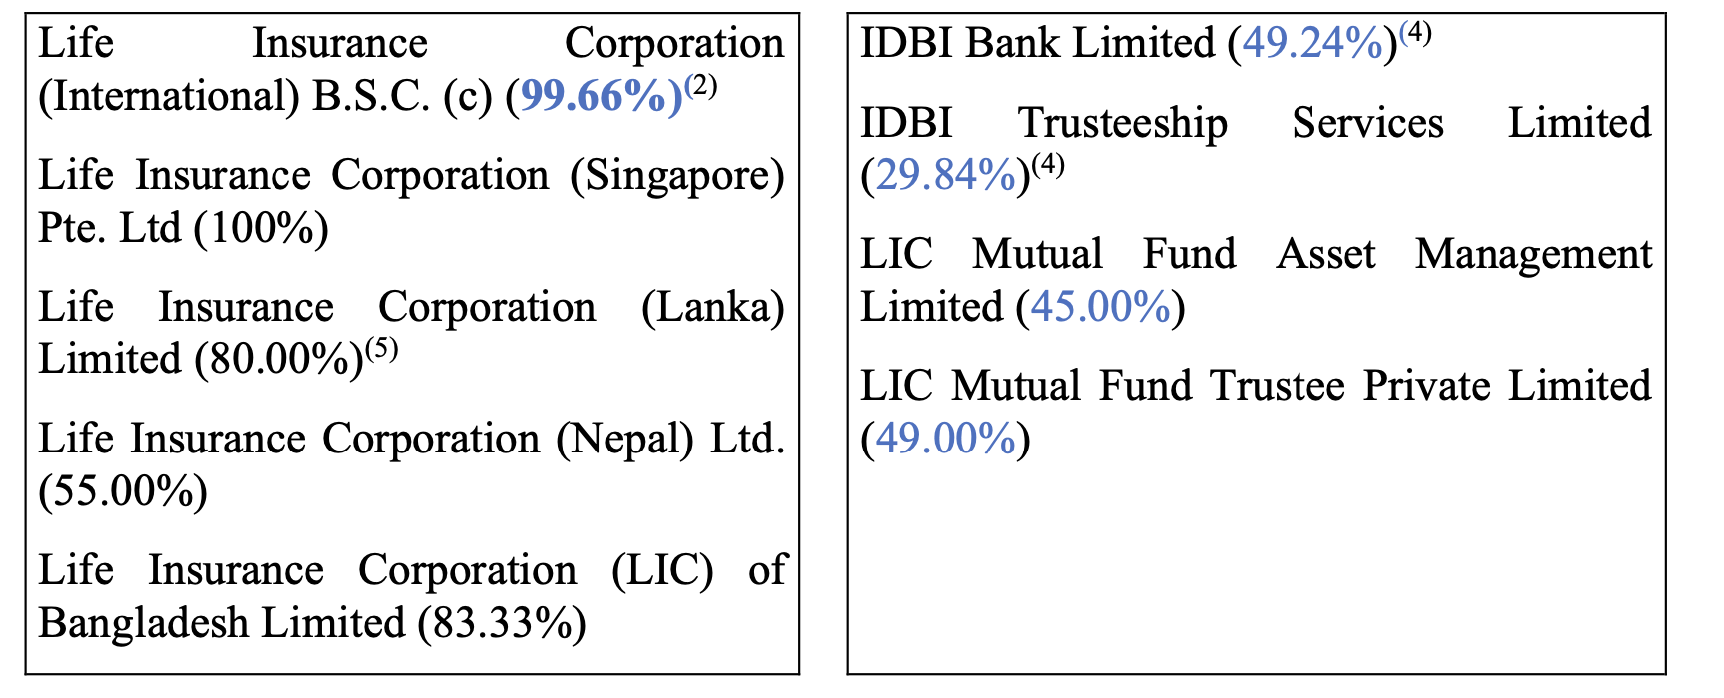 life-insurance-corporation-group-structure